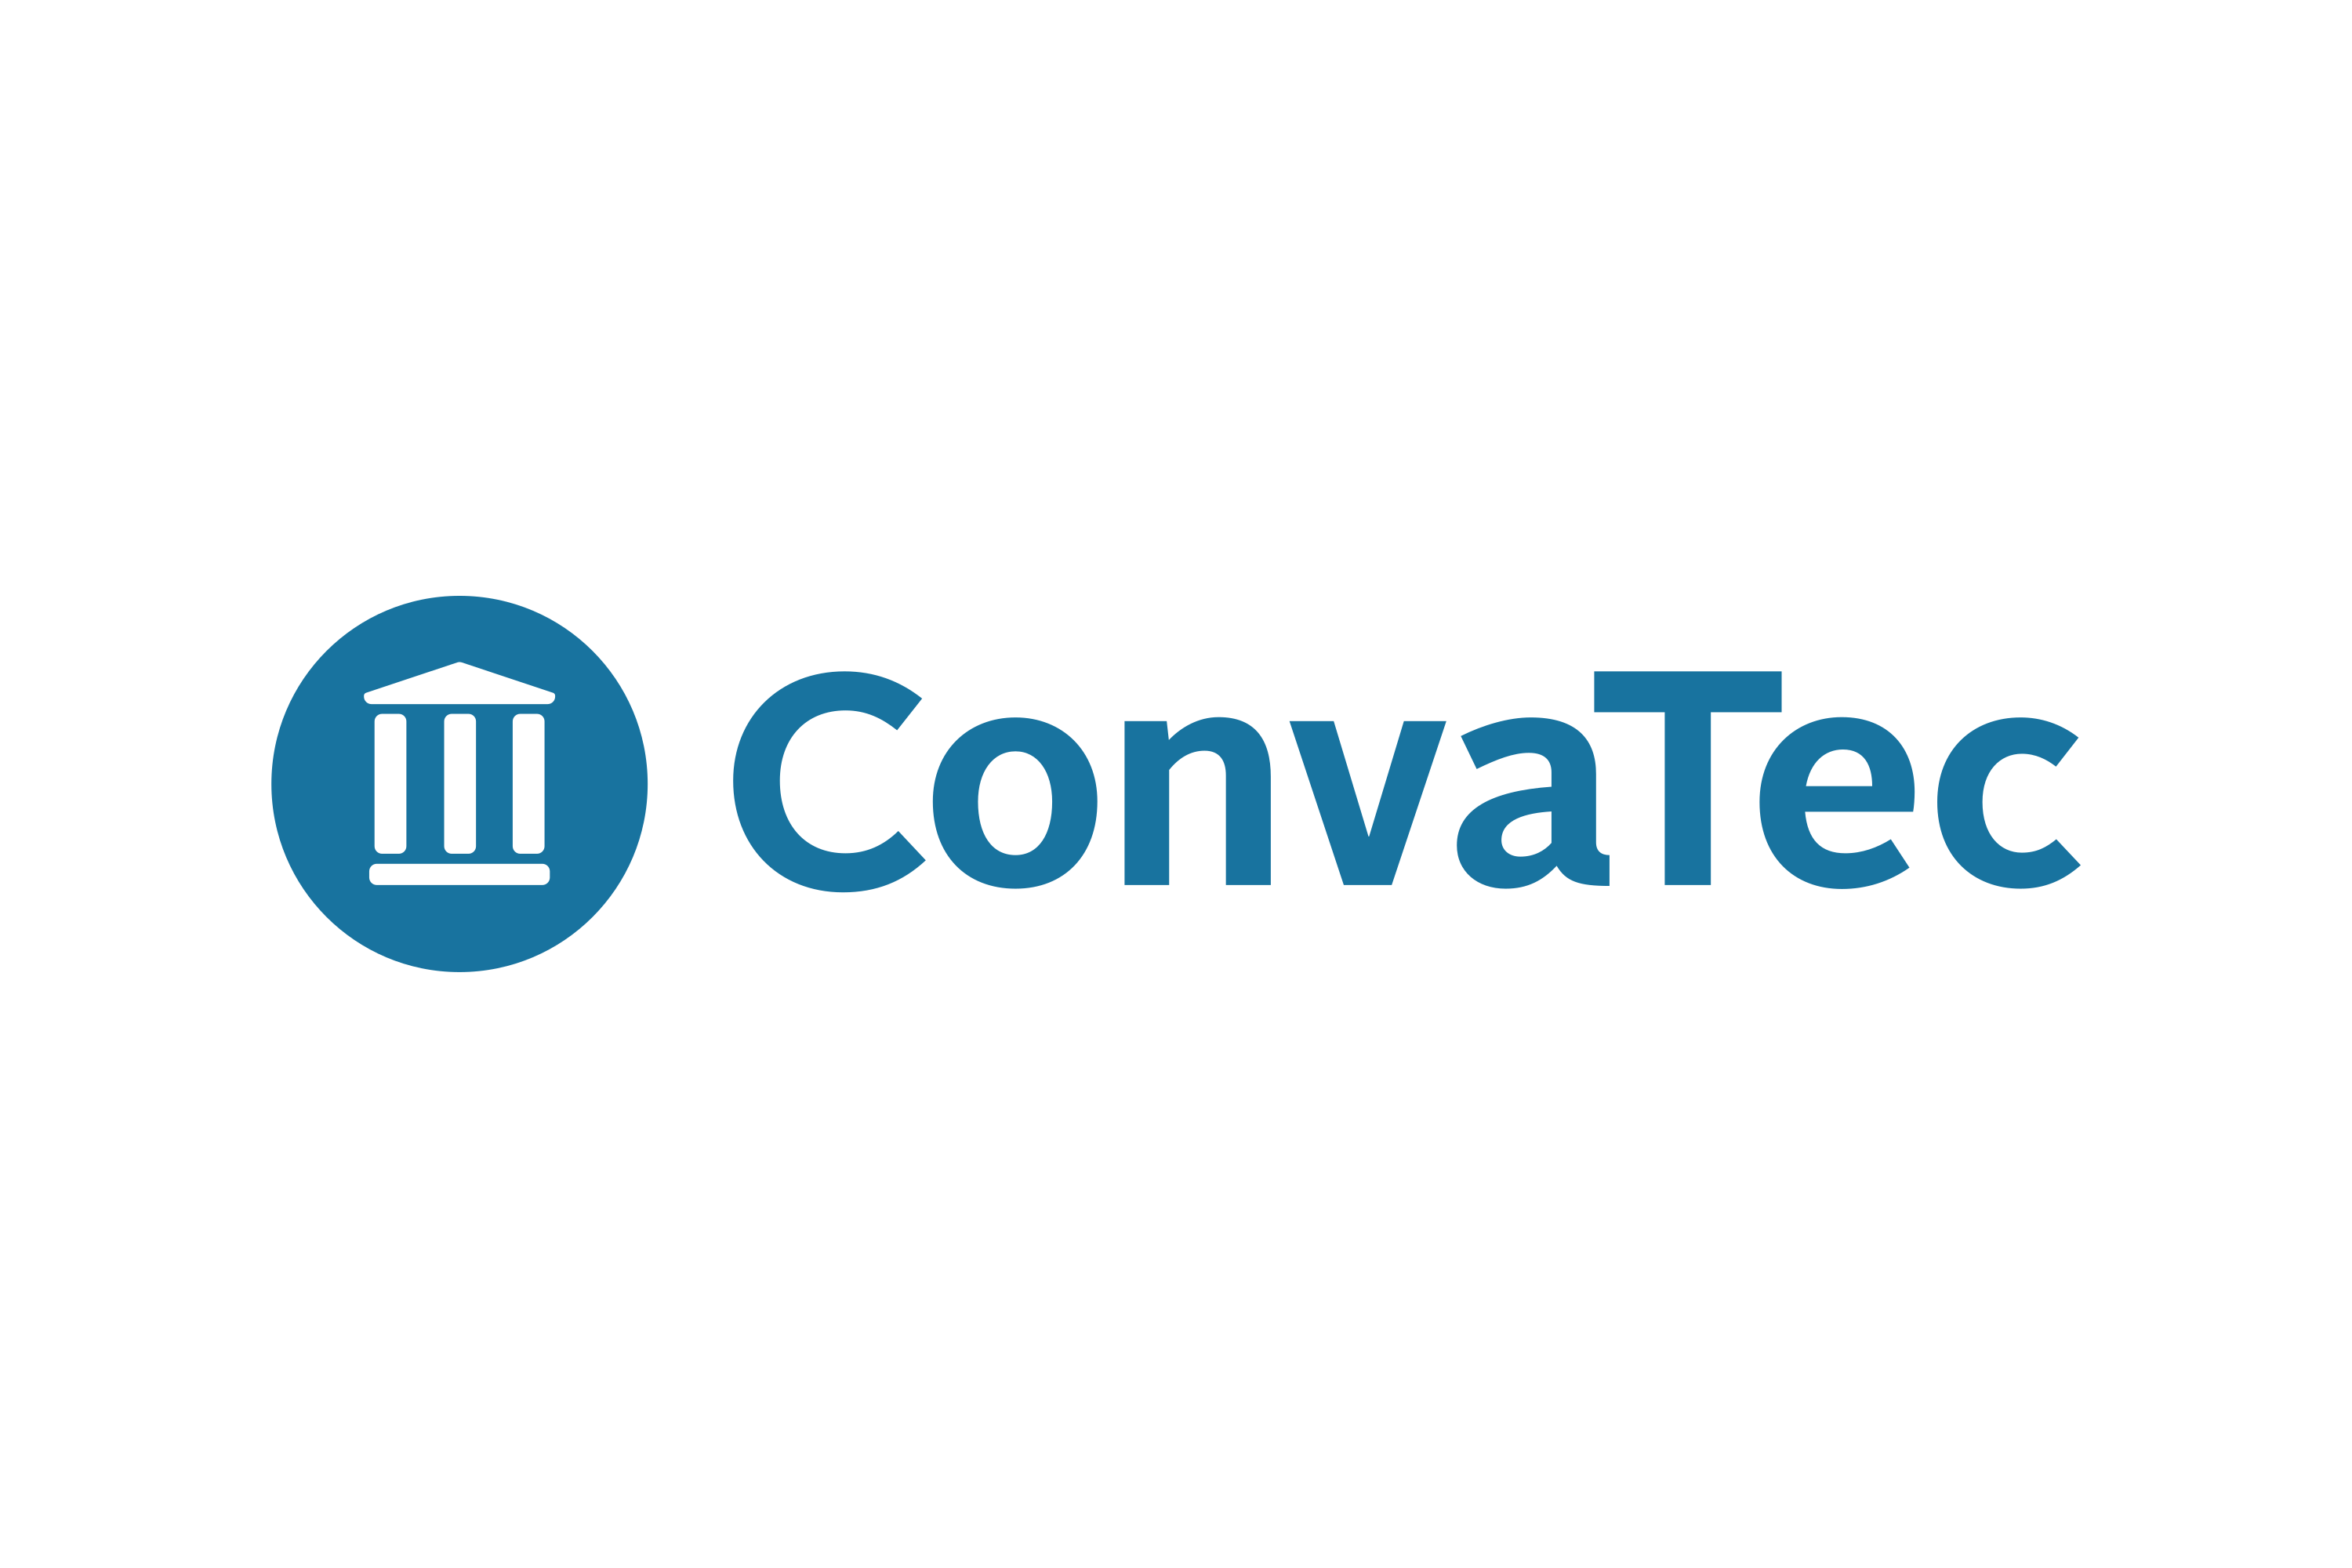 Download ConvaTec Logo in SVG Vector or PNG File Format - Logo.wine